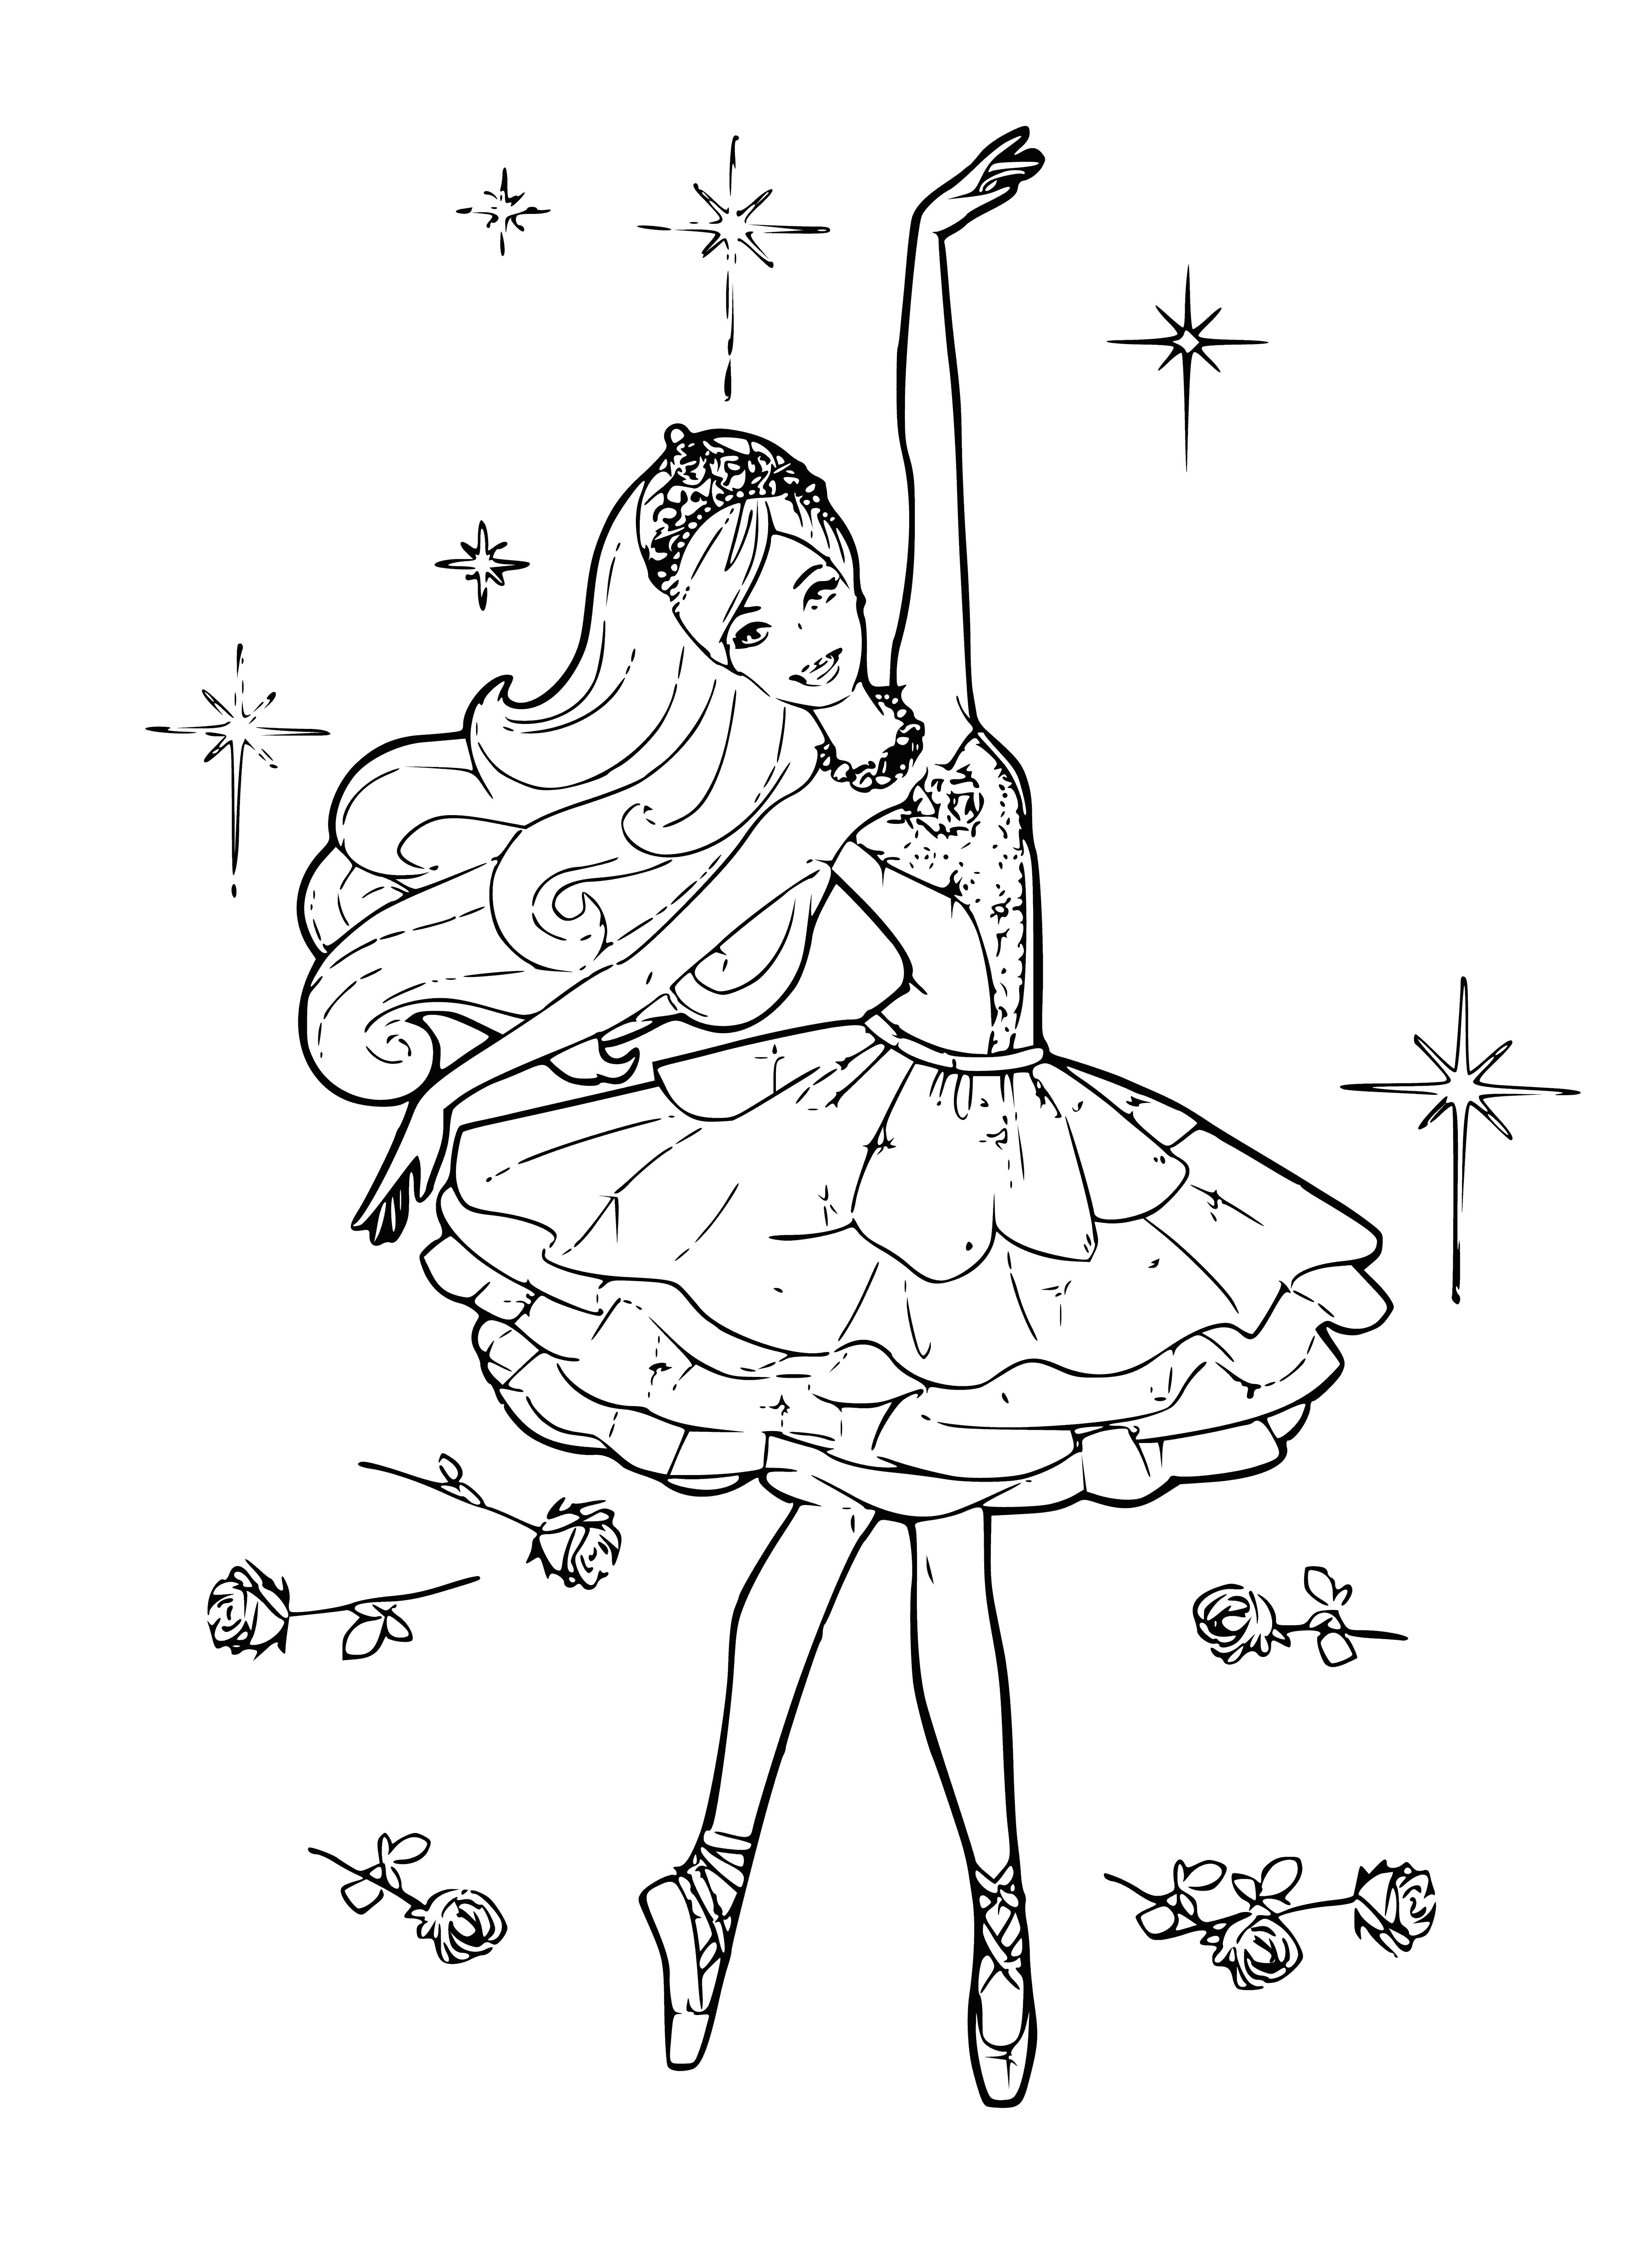 coloring page: Ballerina performing in a pink tutu and tiara, holding rose in hand. #ballerina #danceperformance